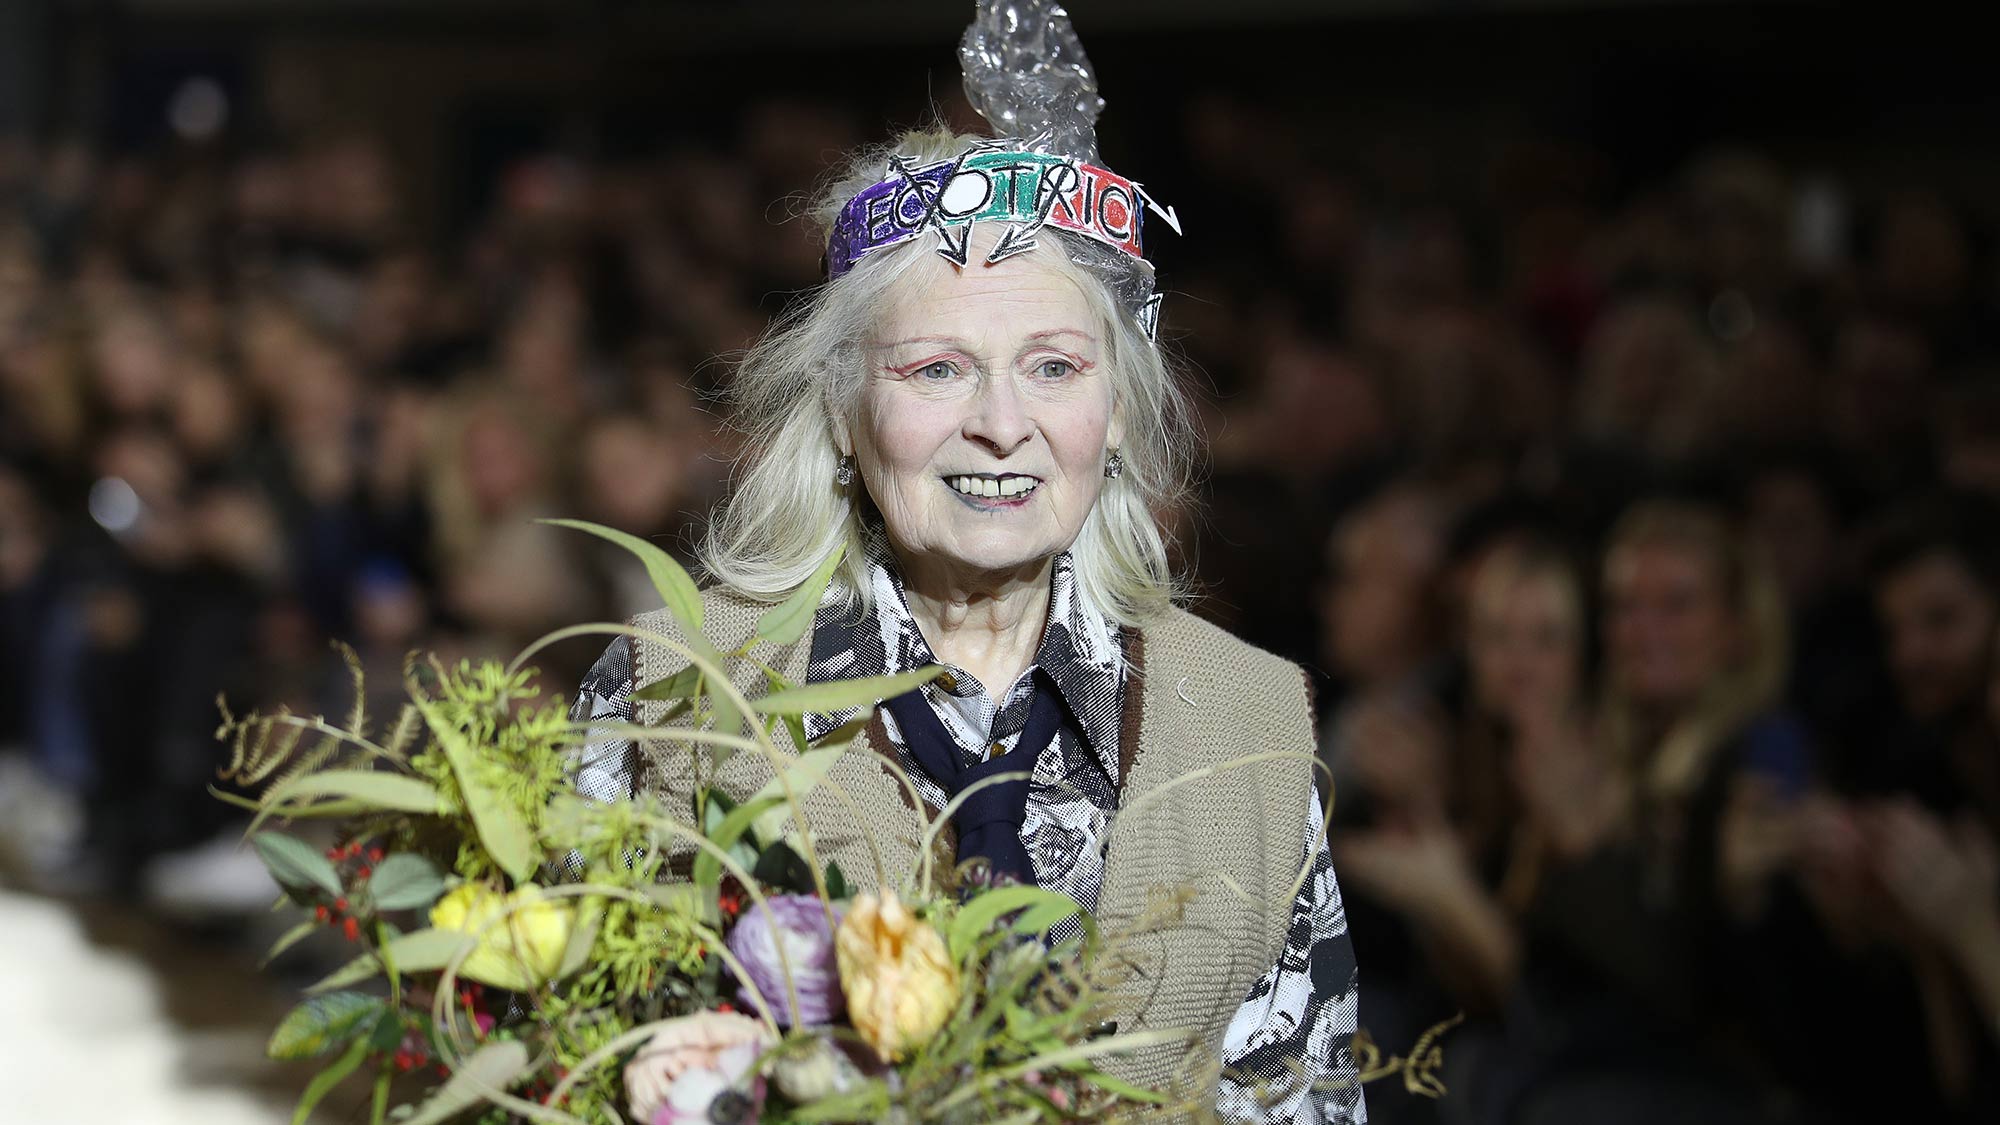 Vivienne Westwood Has Launched A Show-Stopping Collection Of Sustainable Wedding  Gowns